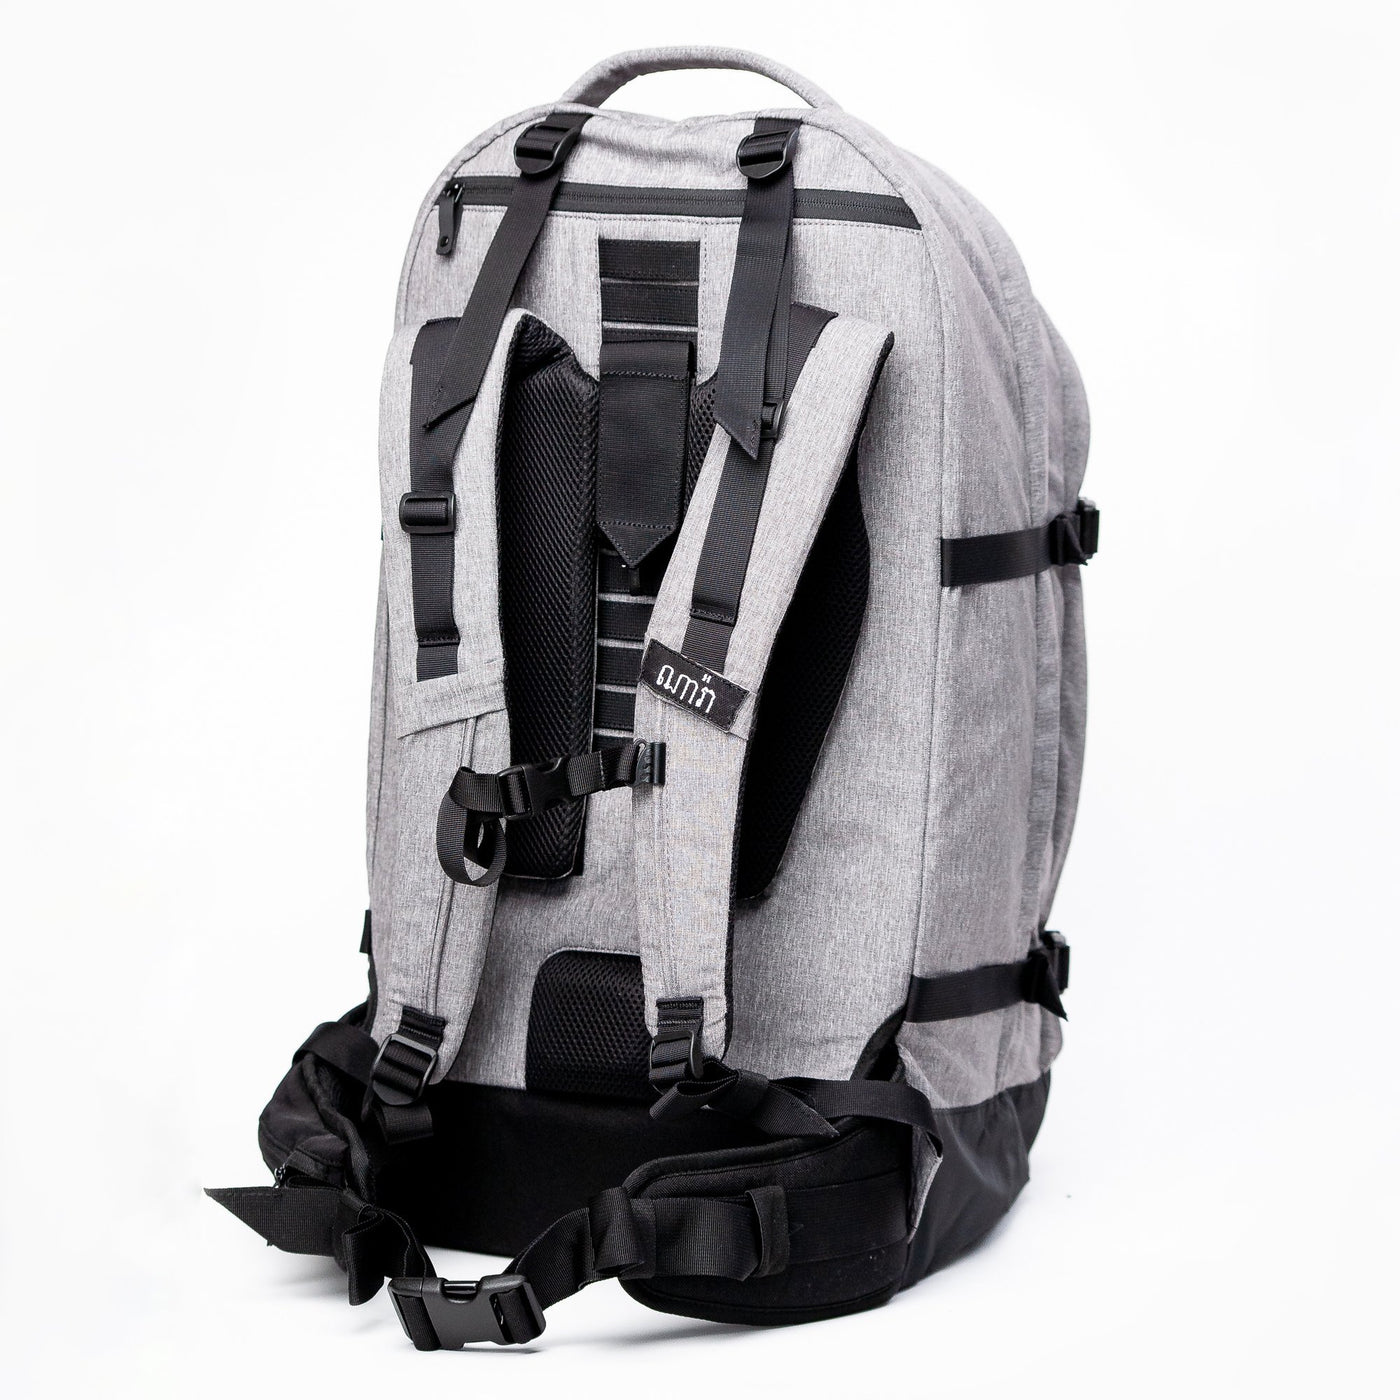 Back View showing the ergonomic suspension system of the Khmer Explorer Travel Backpack